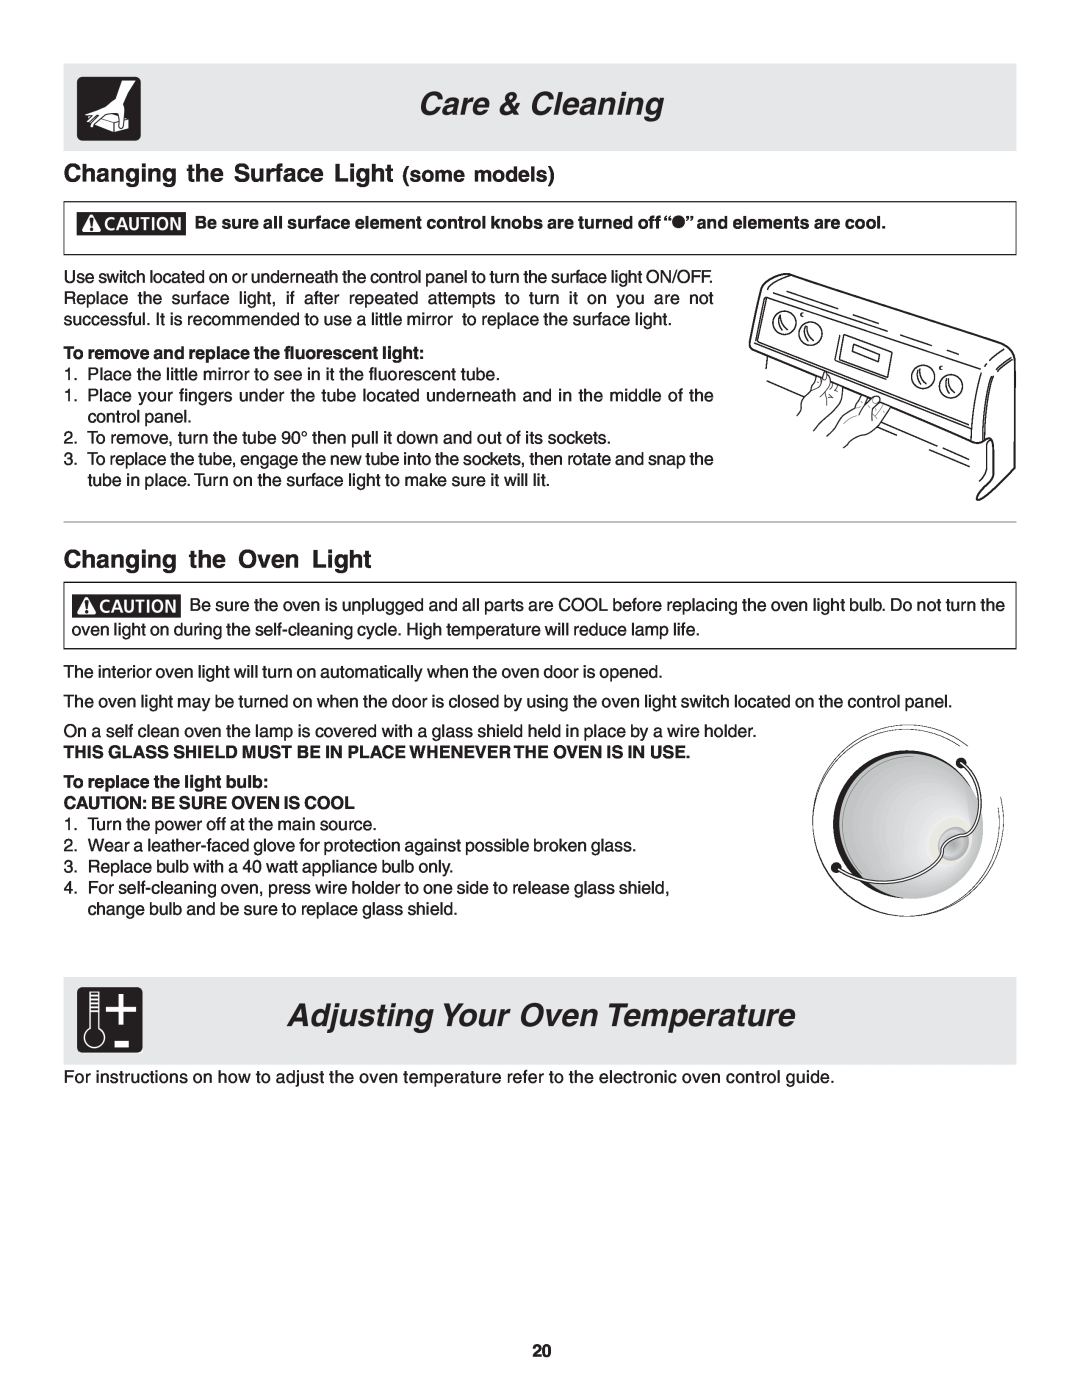 Frigidaire 318200439 Adjusting Your Oven Temperature, Care & Cleaning, To remove and replace the fluorescent light 